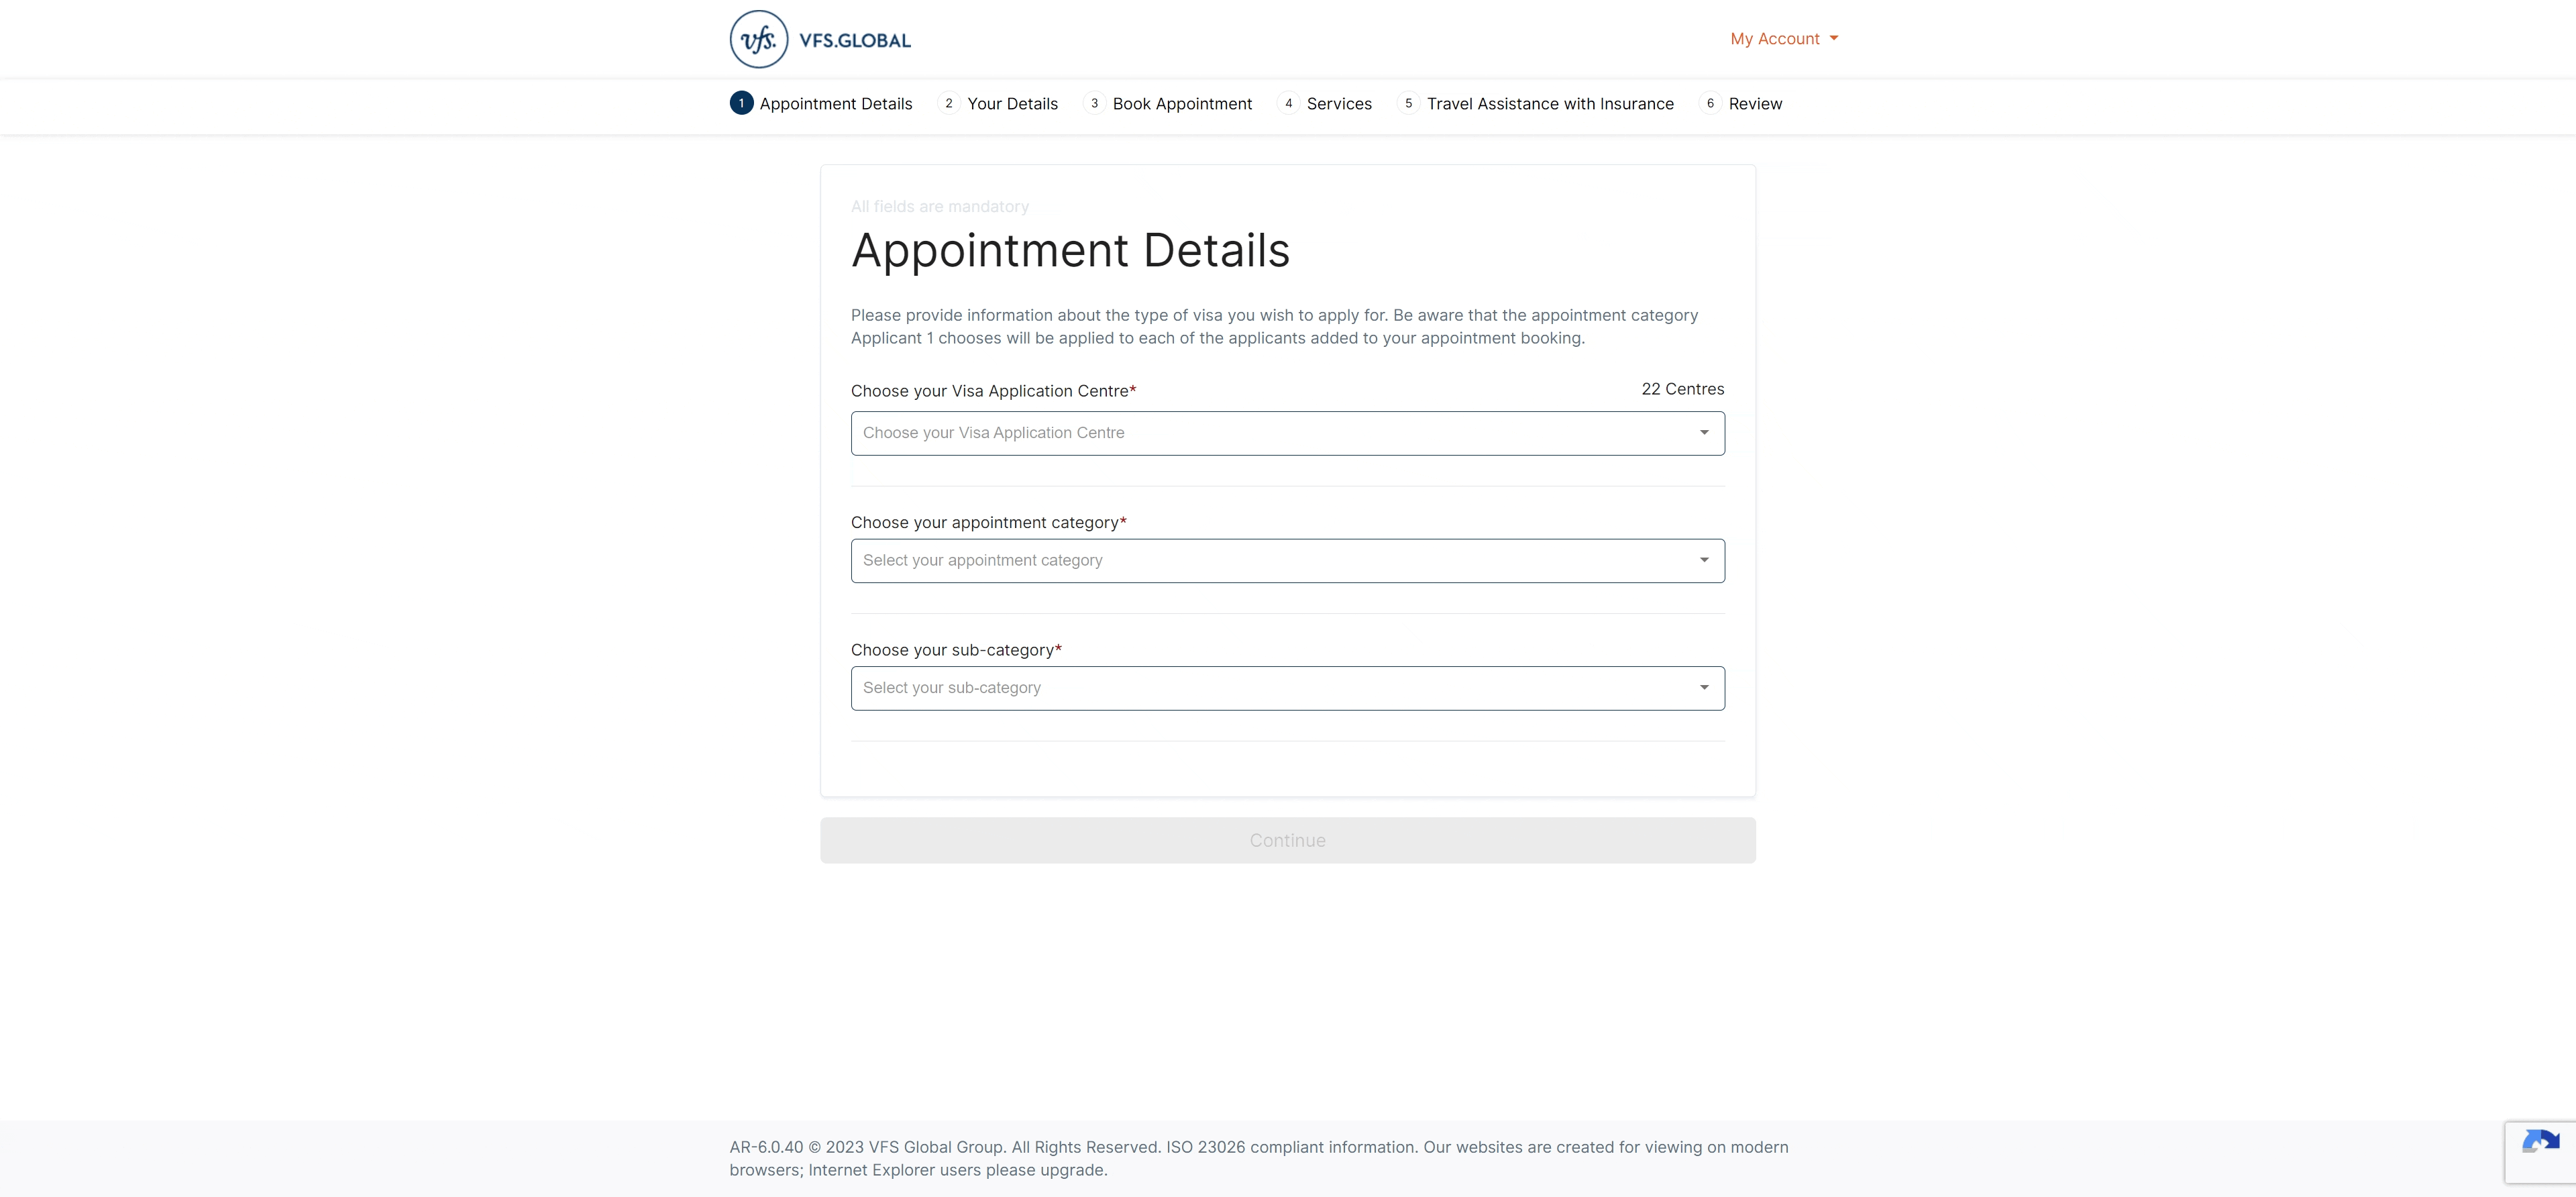 How to apply for a VISA appointment